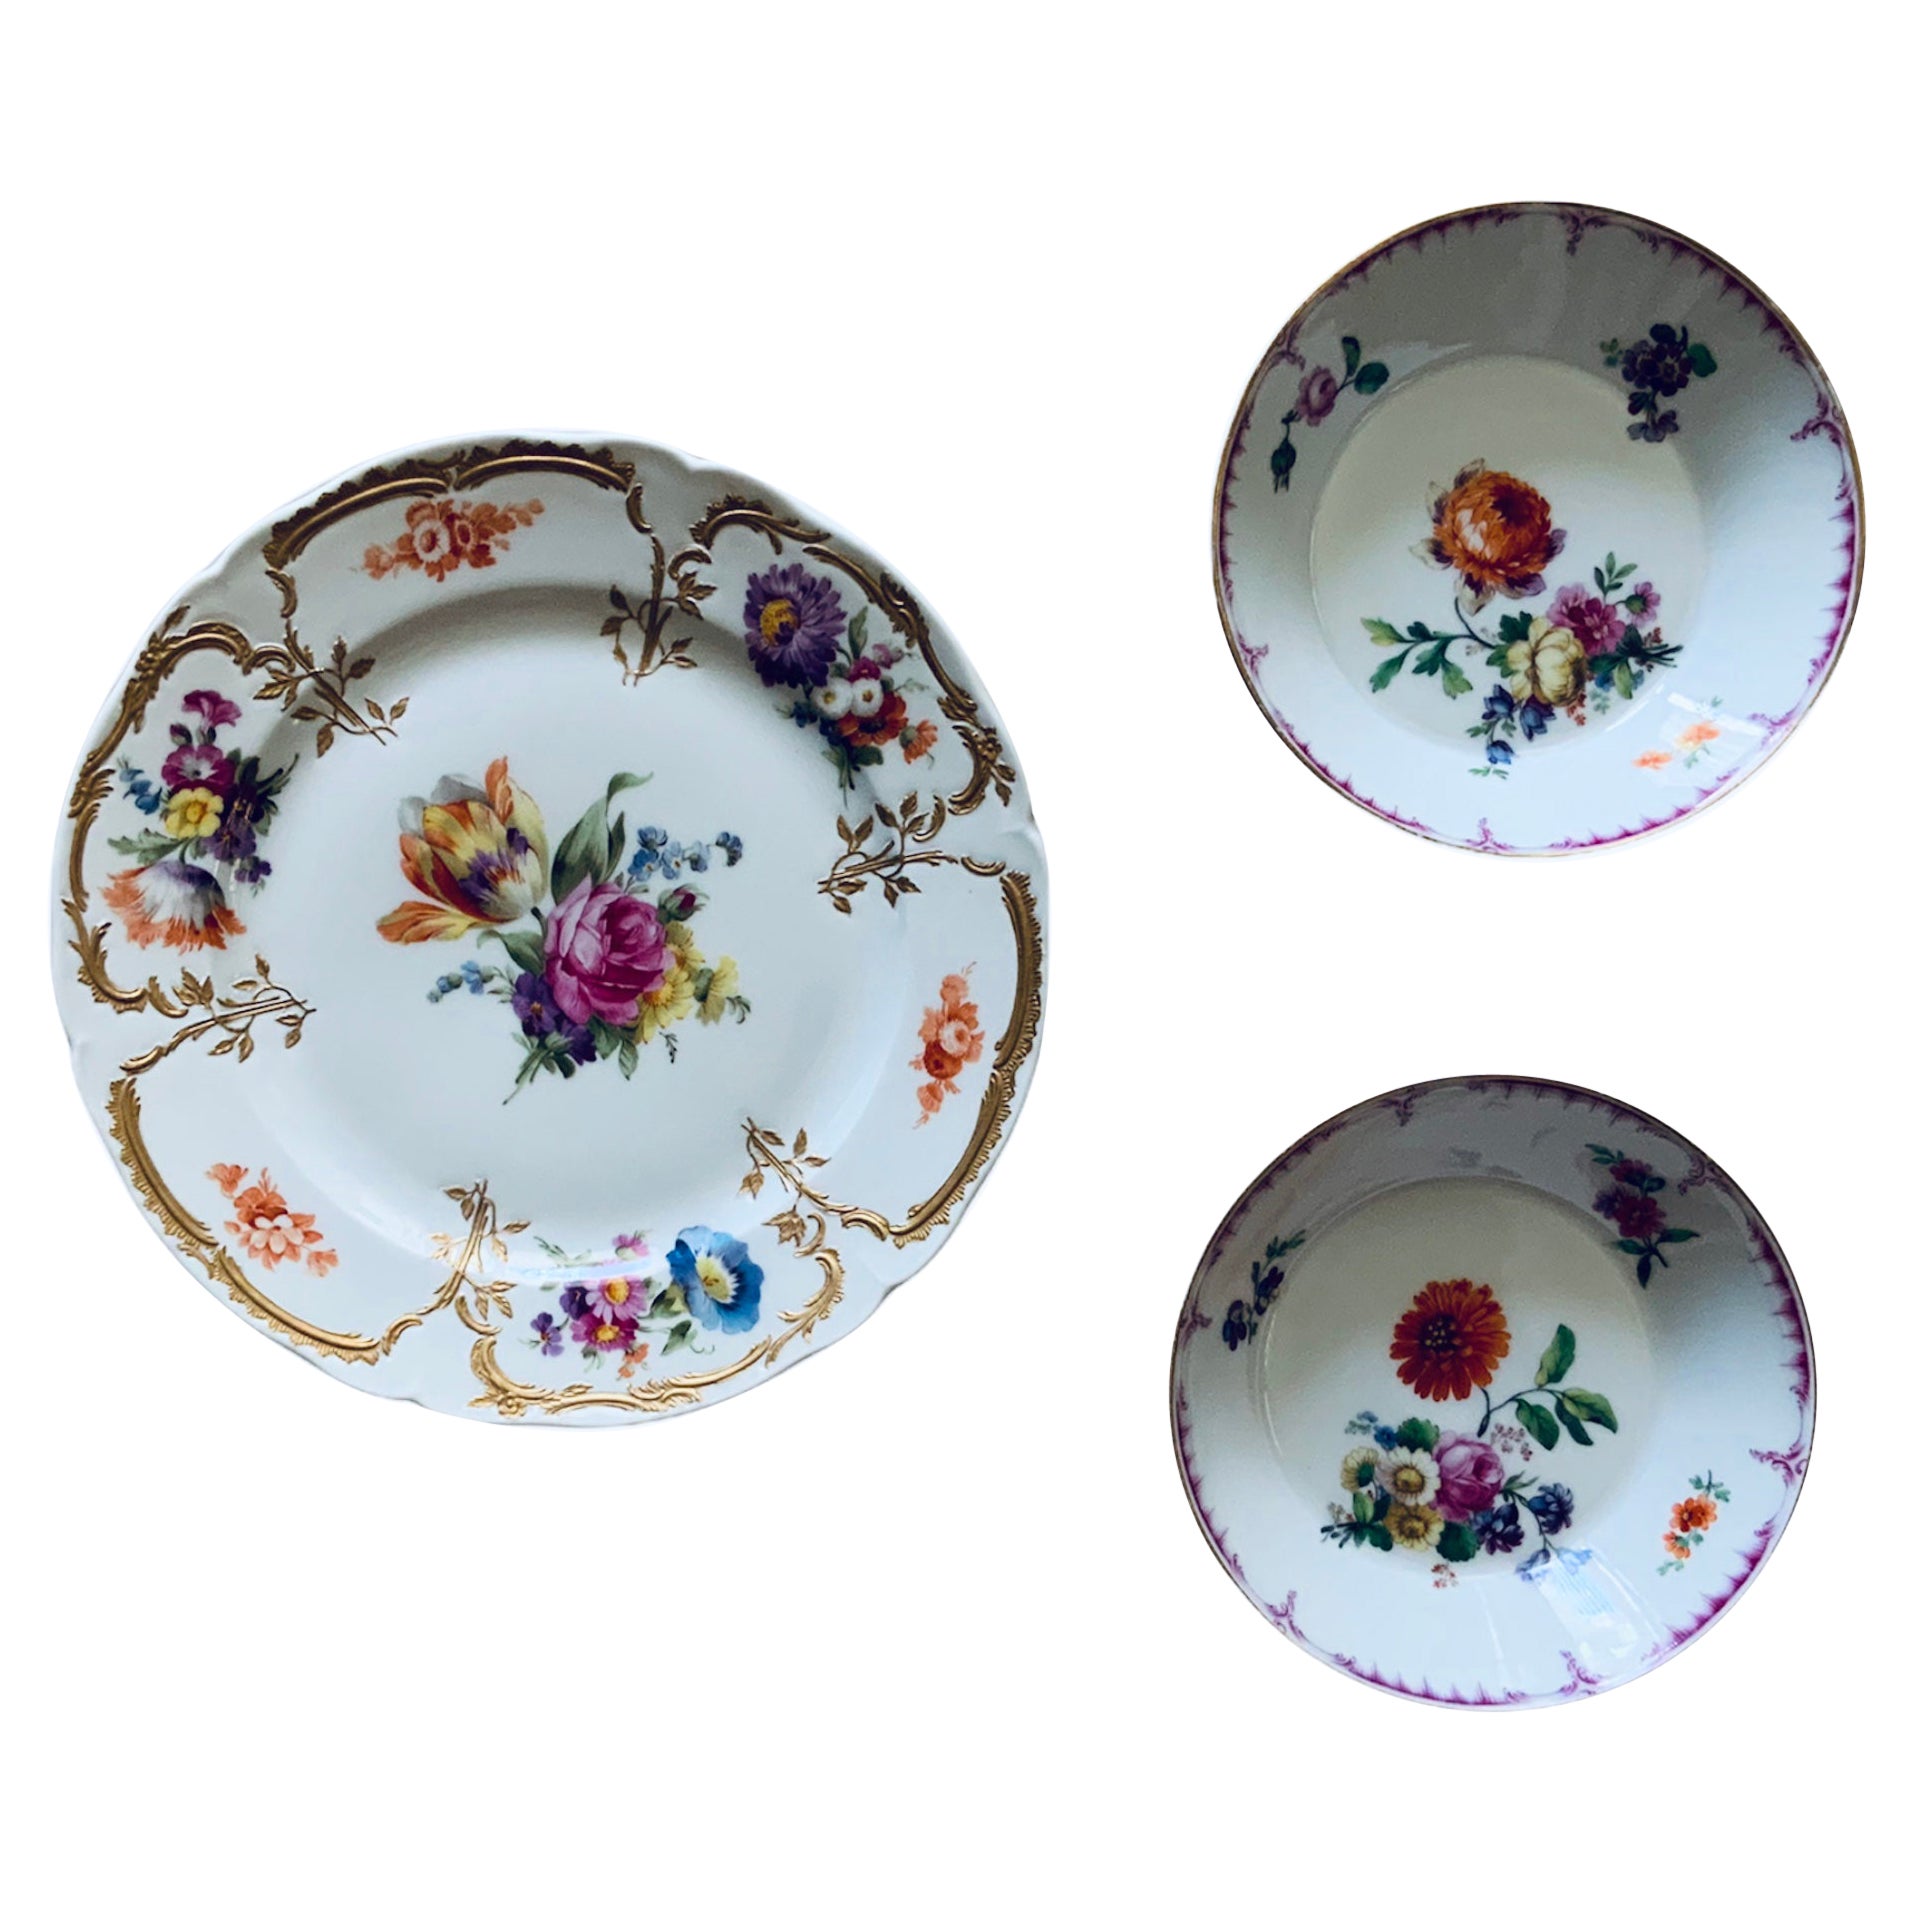 Set of KPM Porcelain Neuzeriat Plate and Two Small Bowls